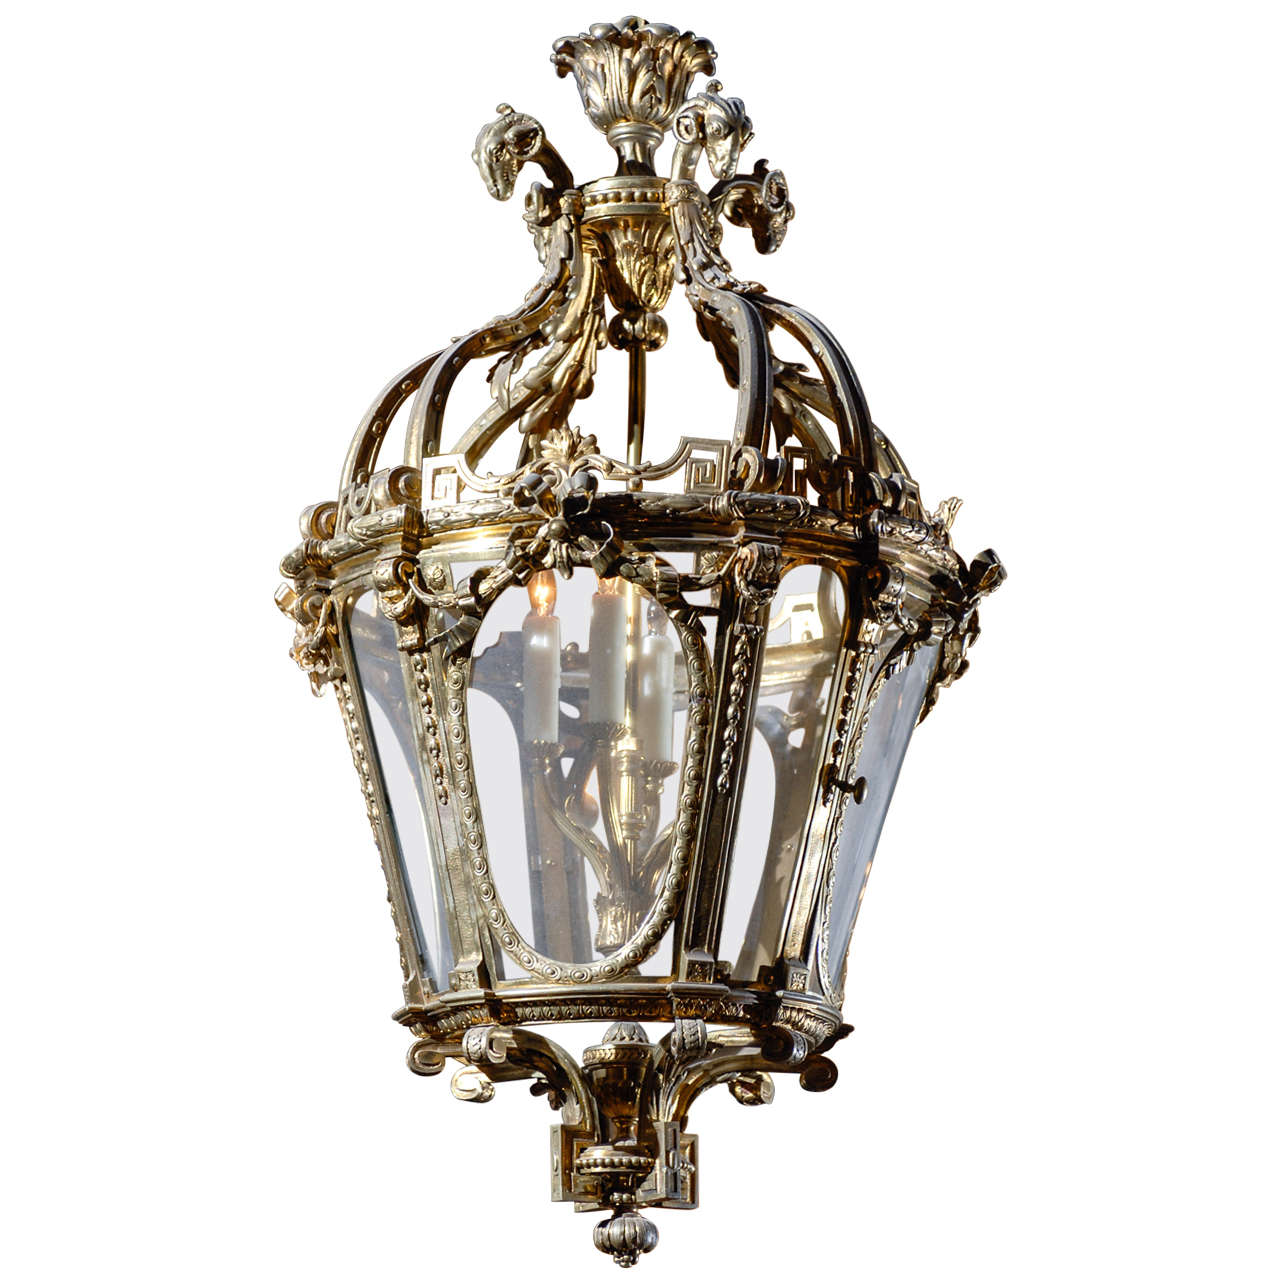 French 19th C. Gilt Brass Lantern With Exceptional Detail For Sale